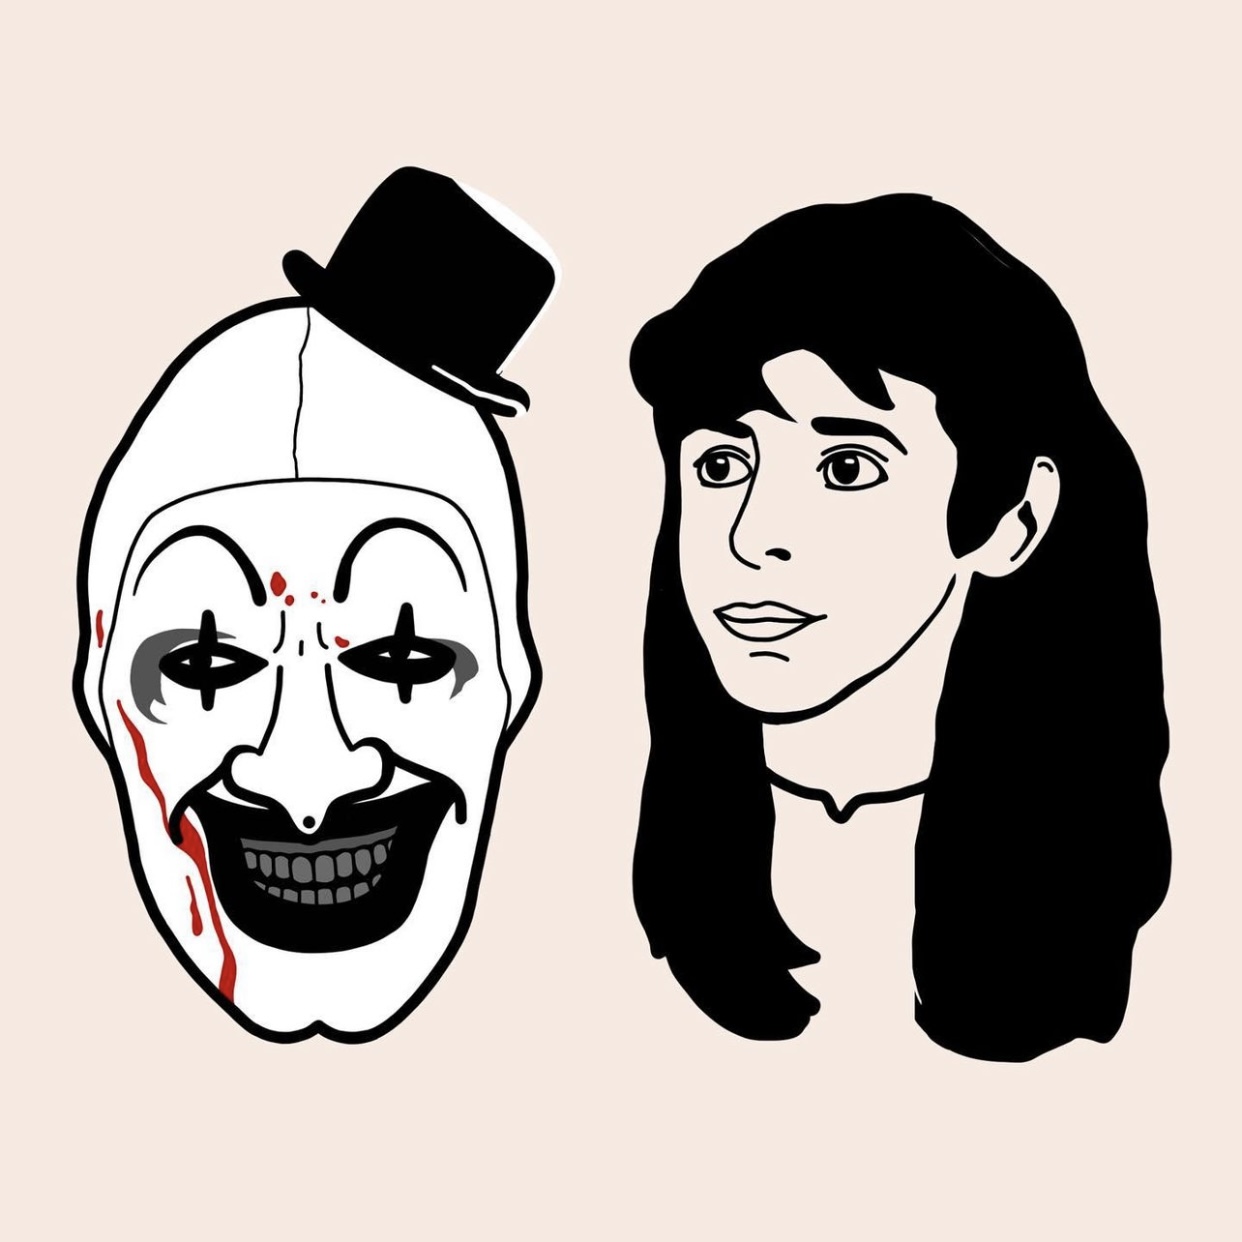 illustration of Art the Clown from Terrifier and Angela from Sleepaway Camp